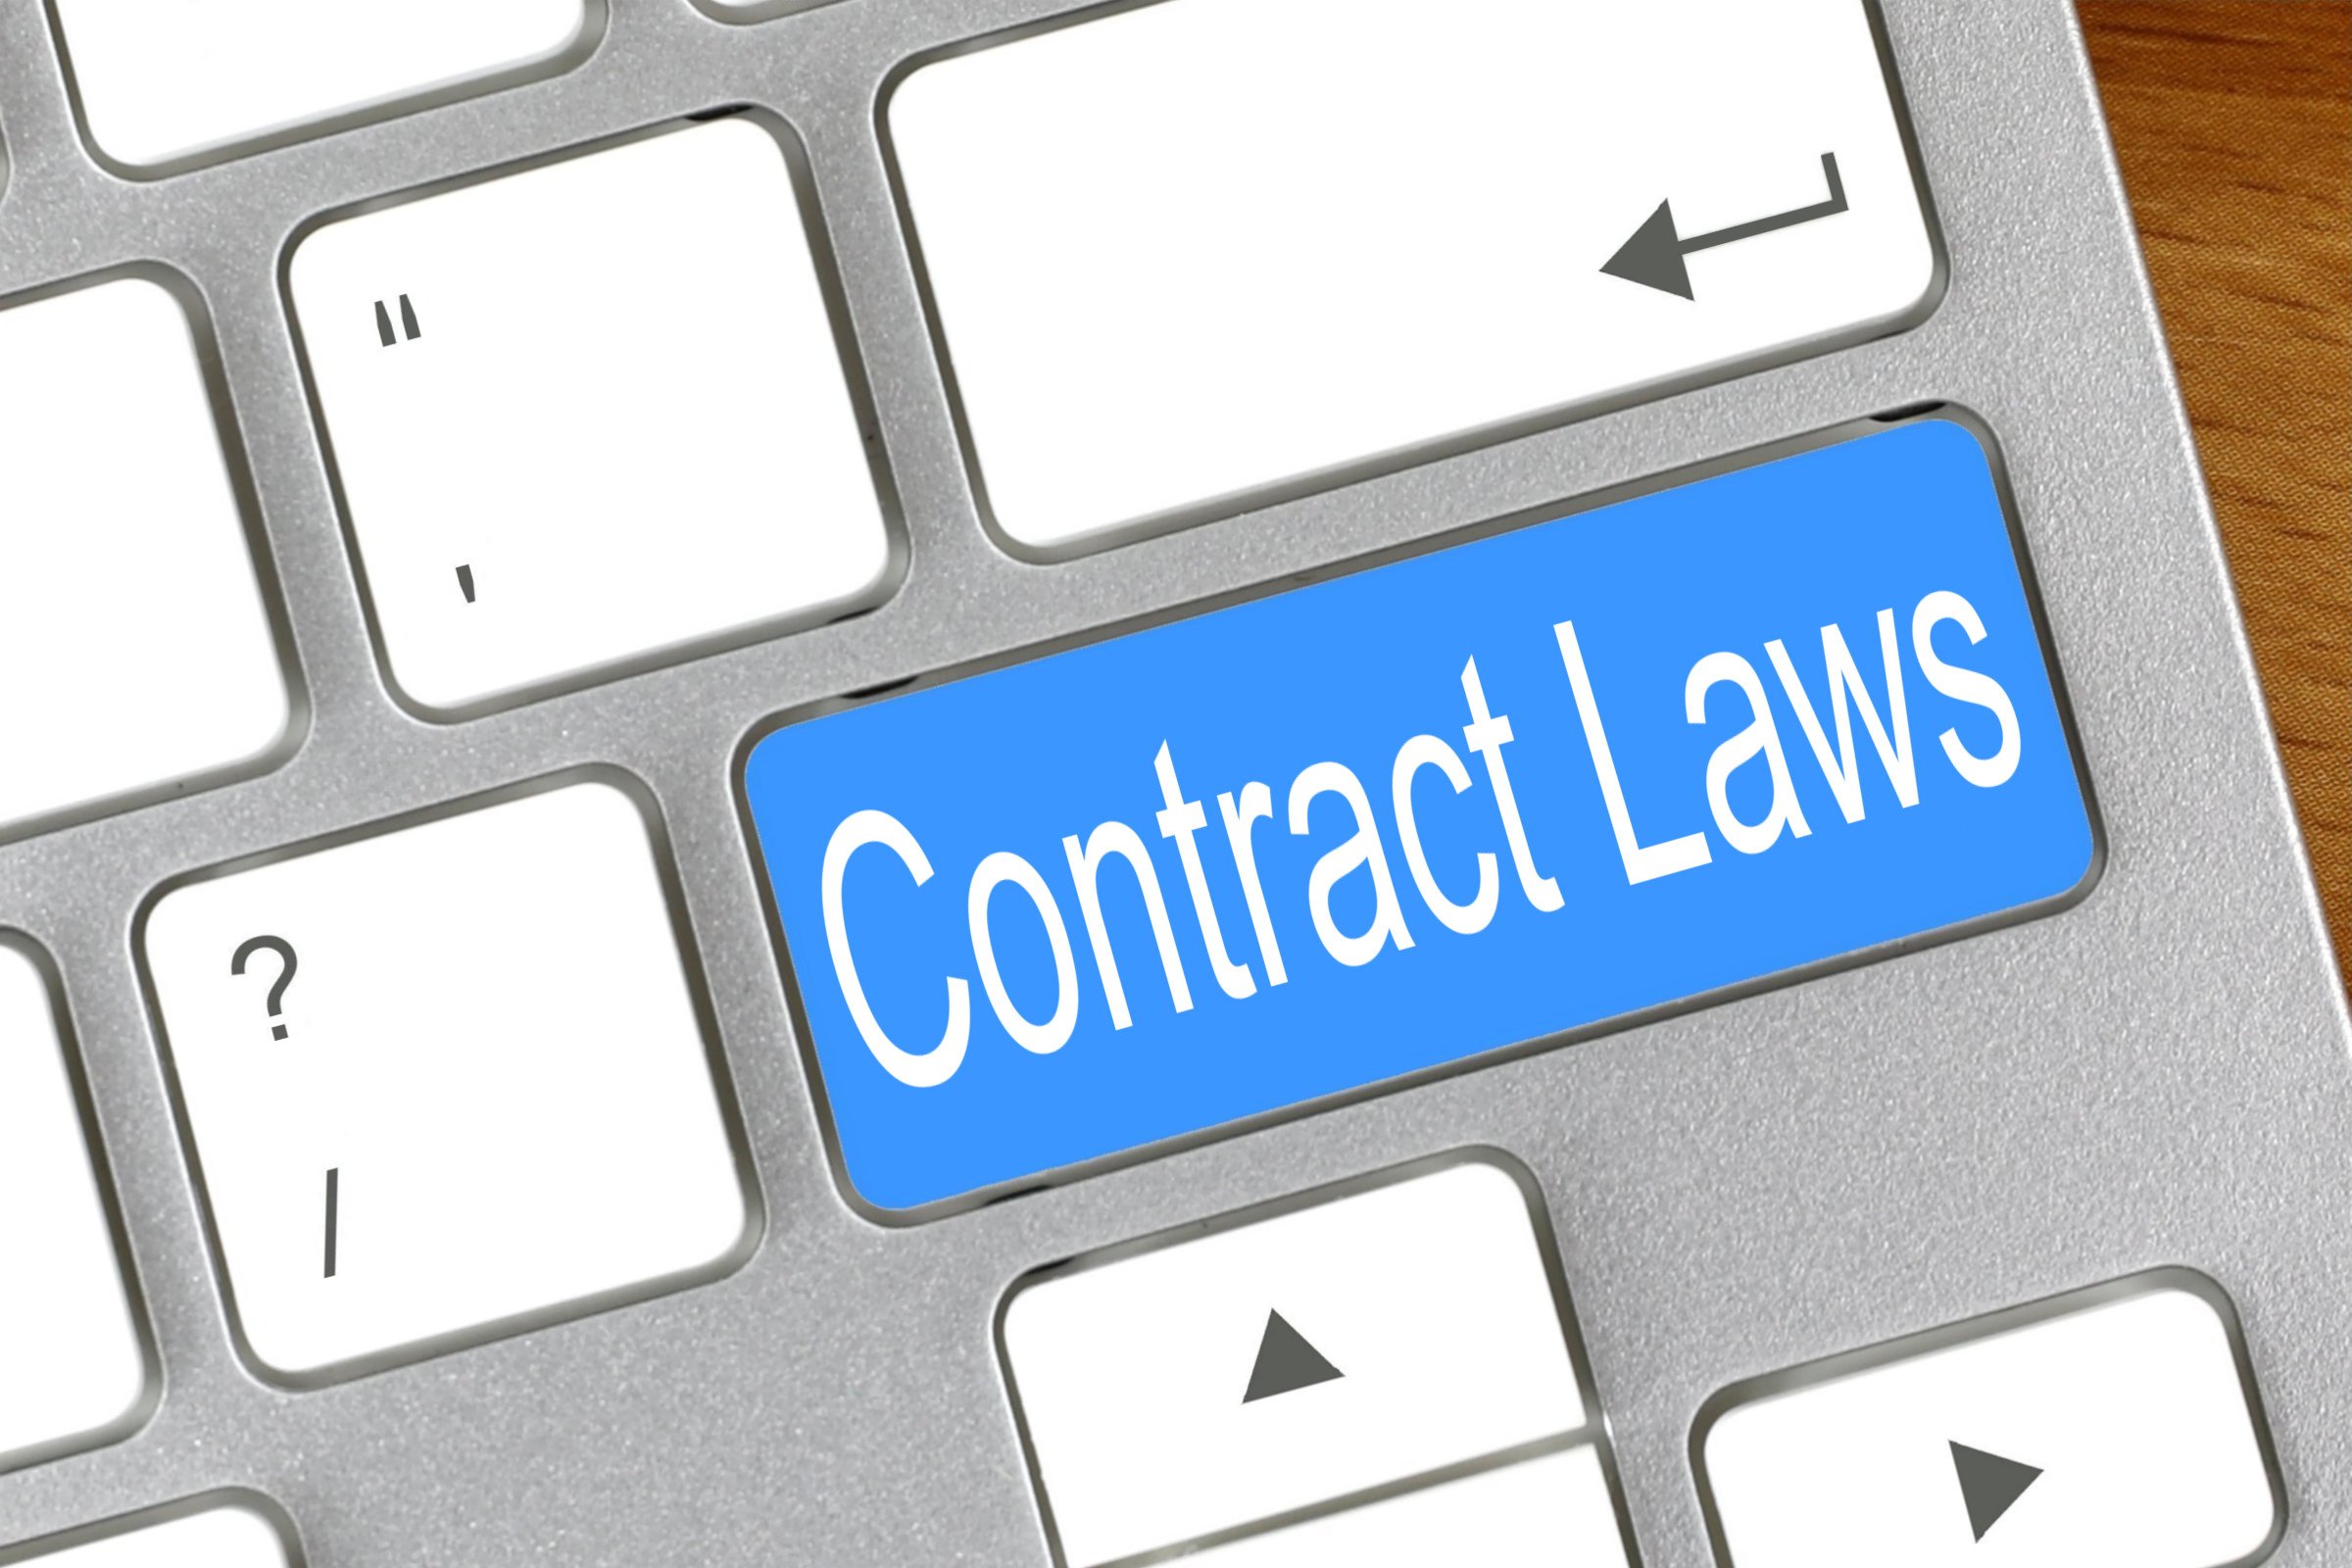 contract laws